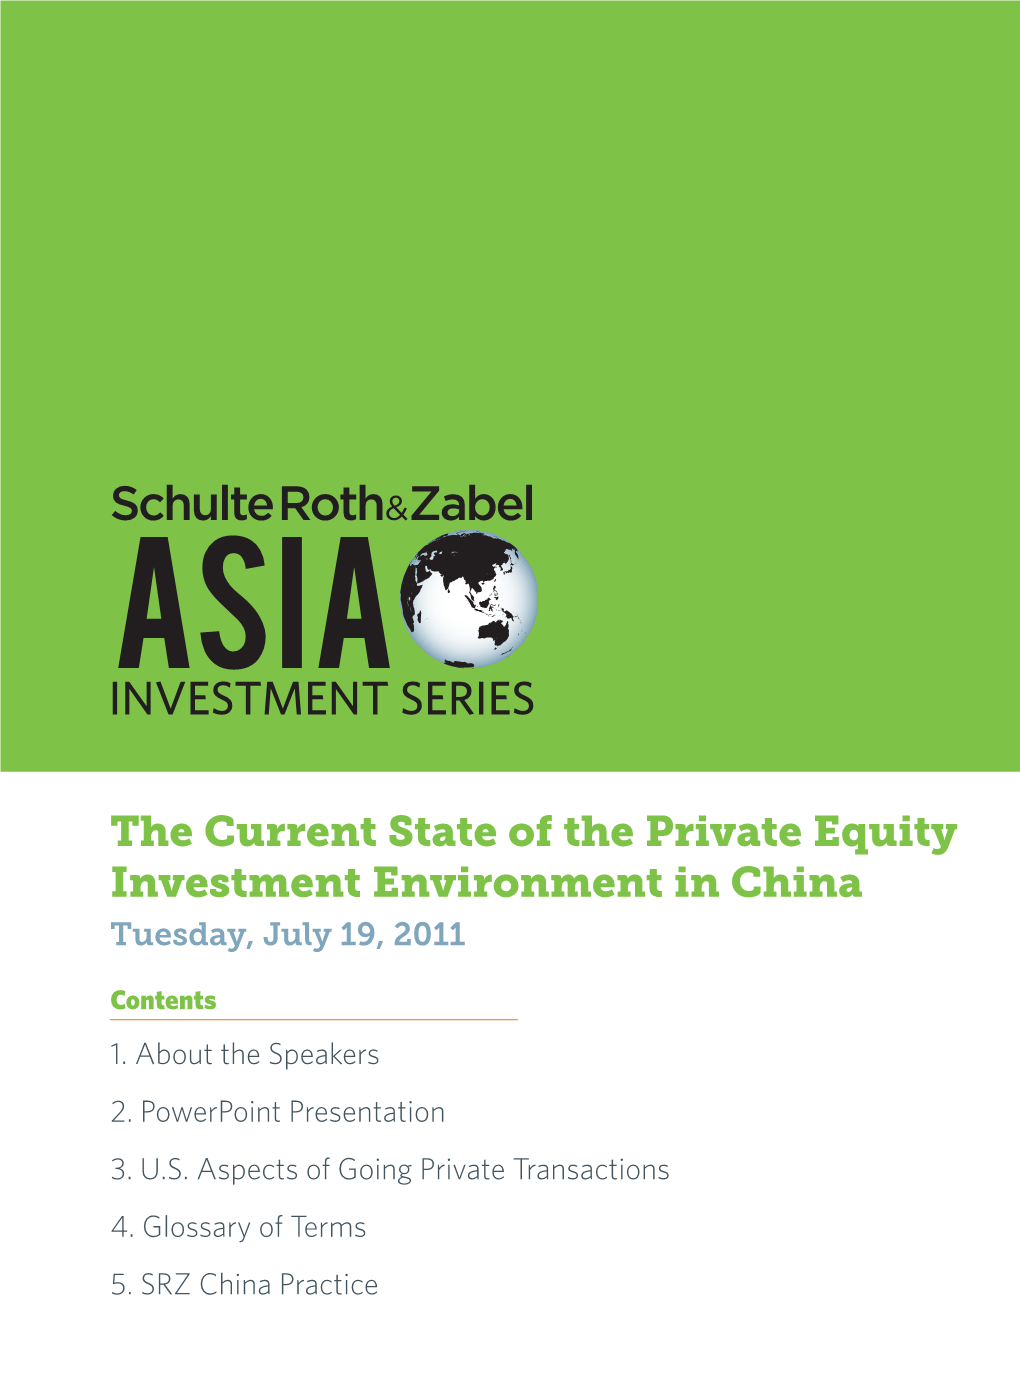 The Current State of the Private Equity Investment Environment in China Tuesday, July 19, 2011